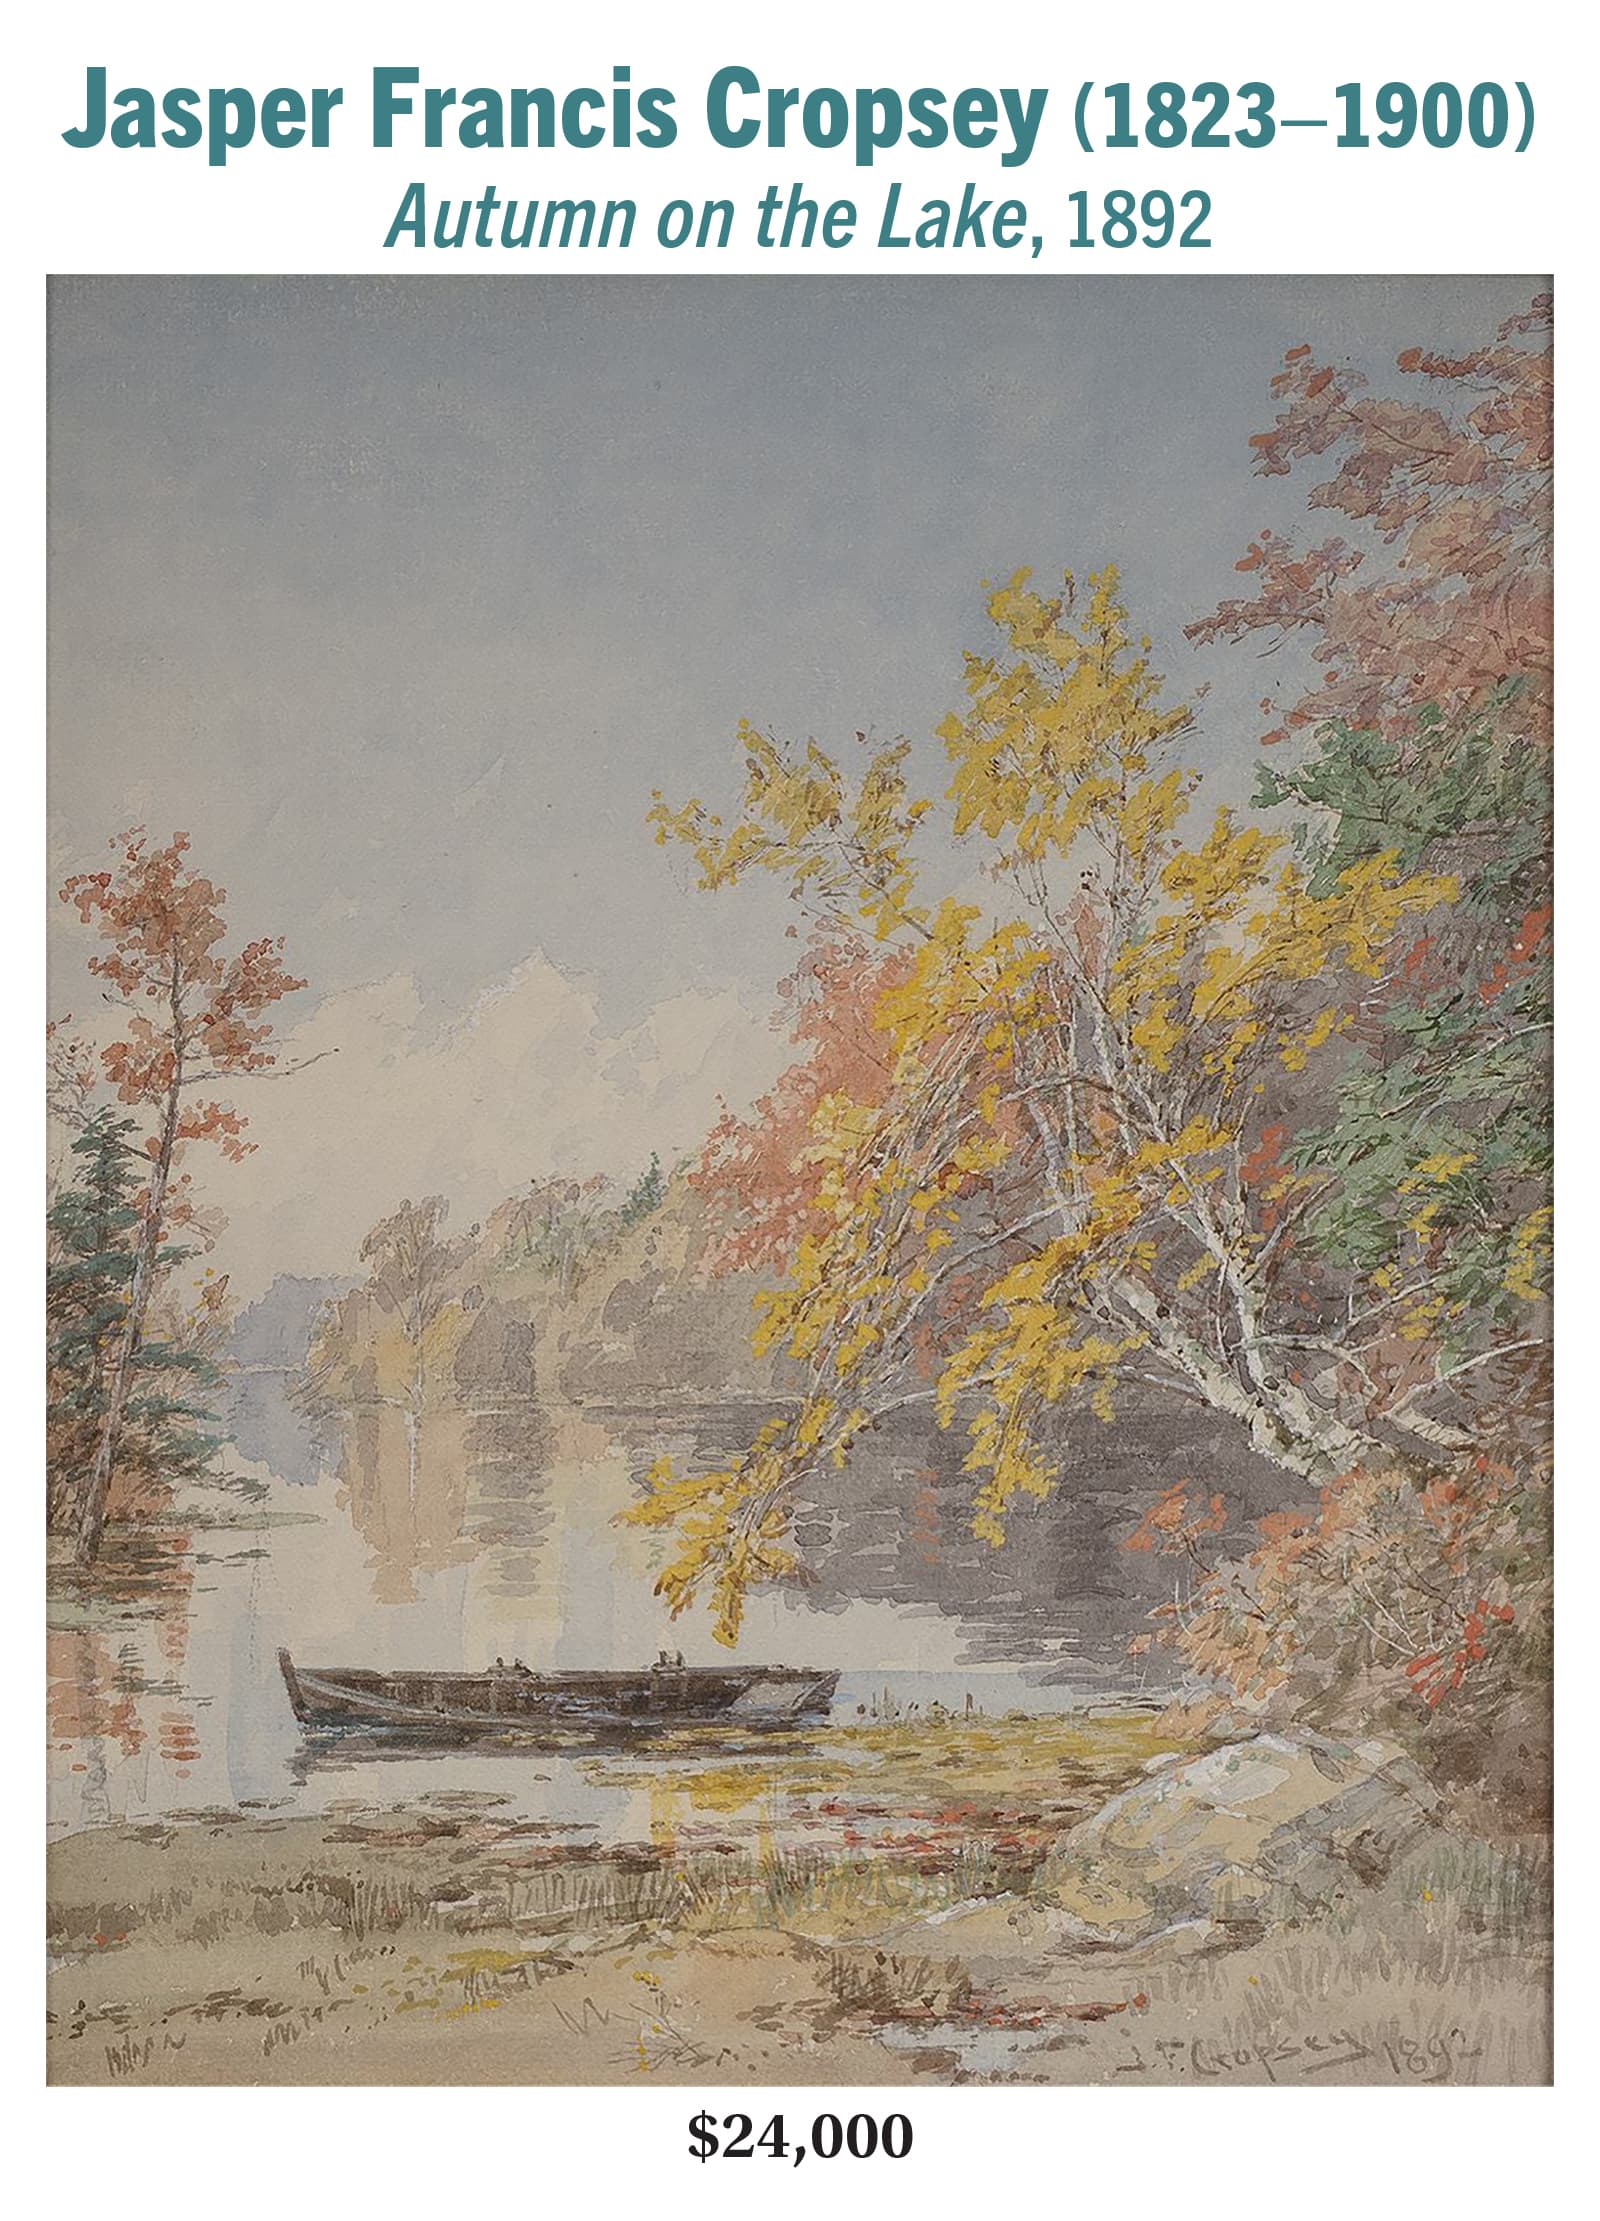 Jasper Francis Cropsey 18231900 Autumn on the Lake 1892 watercolor on paper Hudson River School landscape painting